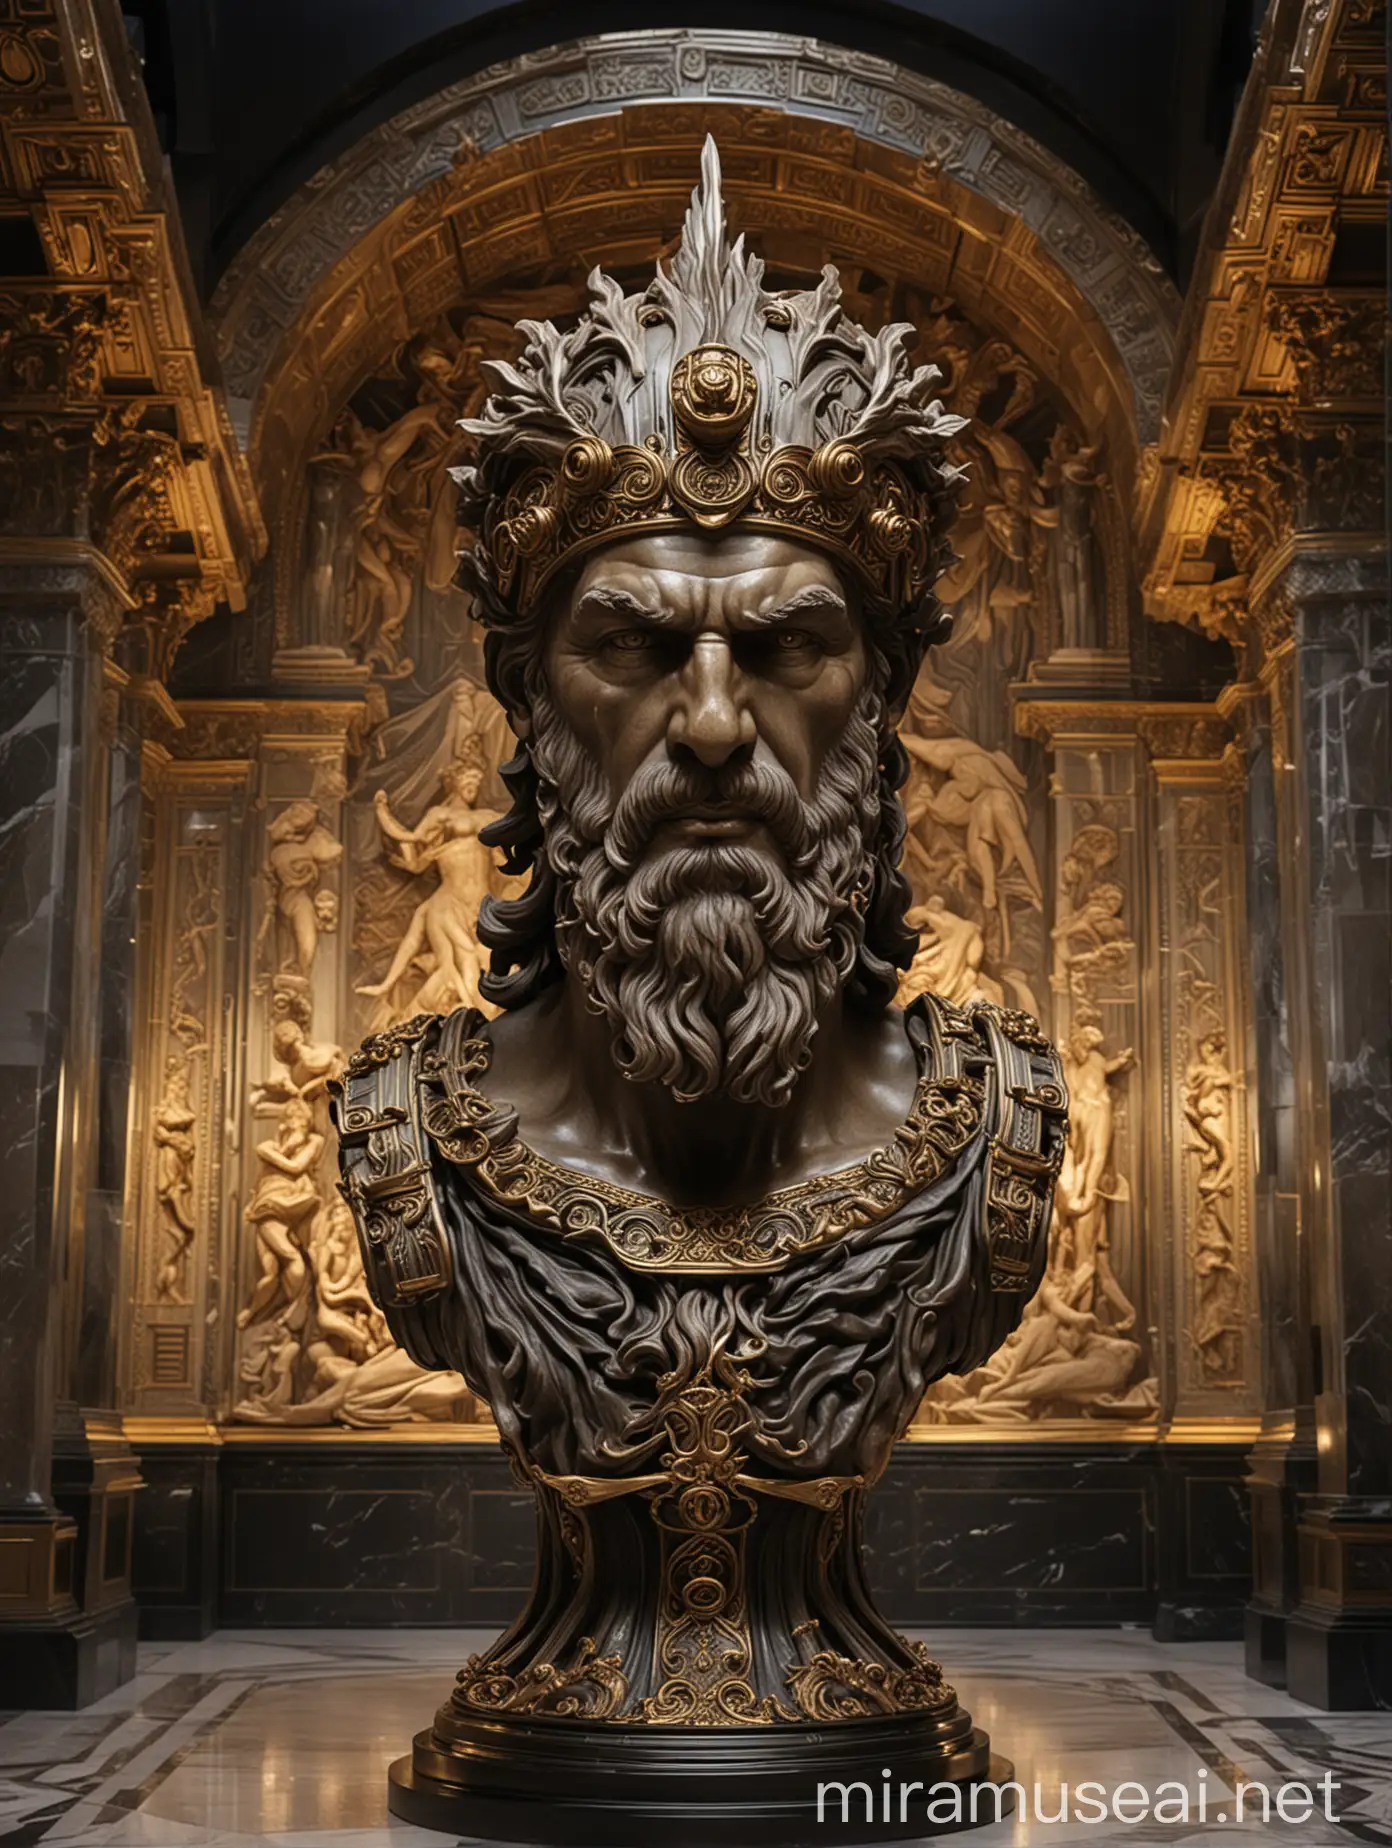 In a French Renaissance-style museum, a hyper-realistic sculpture of Zeus takes center stage. Against the backdrop of opulent surroundings, the sculpture portrays Zeus with intricate details, blending ancient Greek aesthetics with futuristic elements.

The sculpture's cybernetic helmet seamlessly integrates with Zeus's divine features, featuring carbon fiber textures with golden filigree accents. Sleek metallic accents add depth to the design, while pulsating energy conduits enhance the sculpture's dynamic presence.

As visitors approach, they are greeted by the mesmerizing sight of Zeus, exuding an aura of power and majesty. The fusion of ancient mythology and modern technology is palpable, symbolizing the timeless allure of Greek mythology in a contemporary setting.